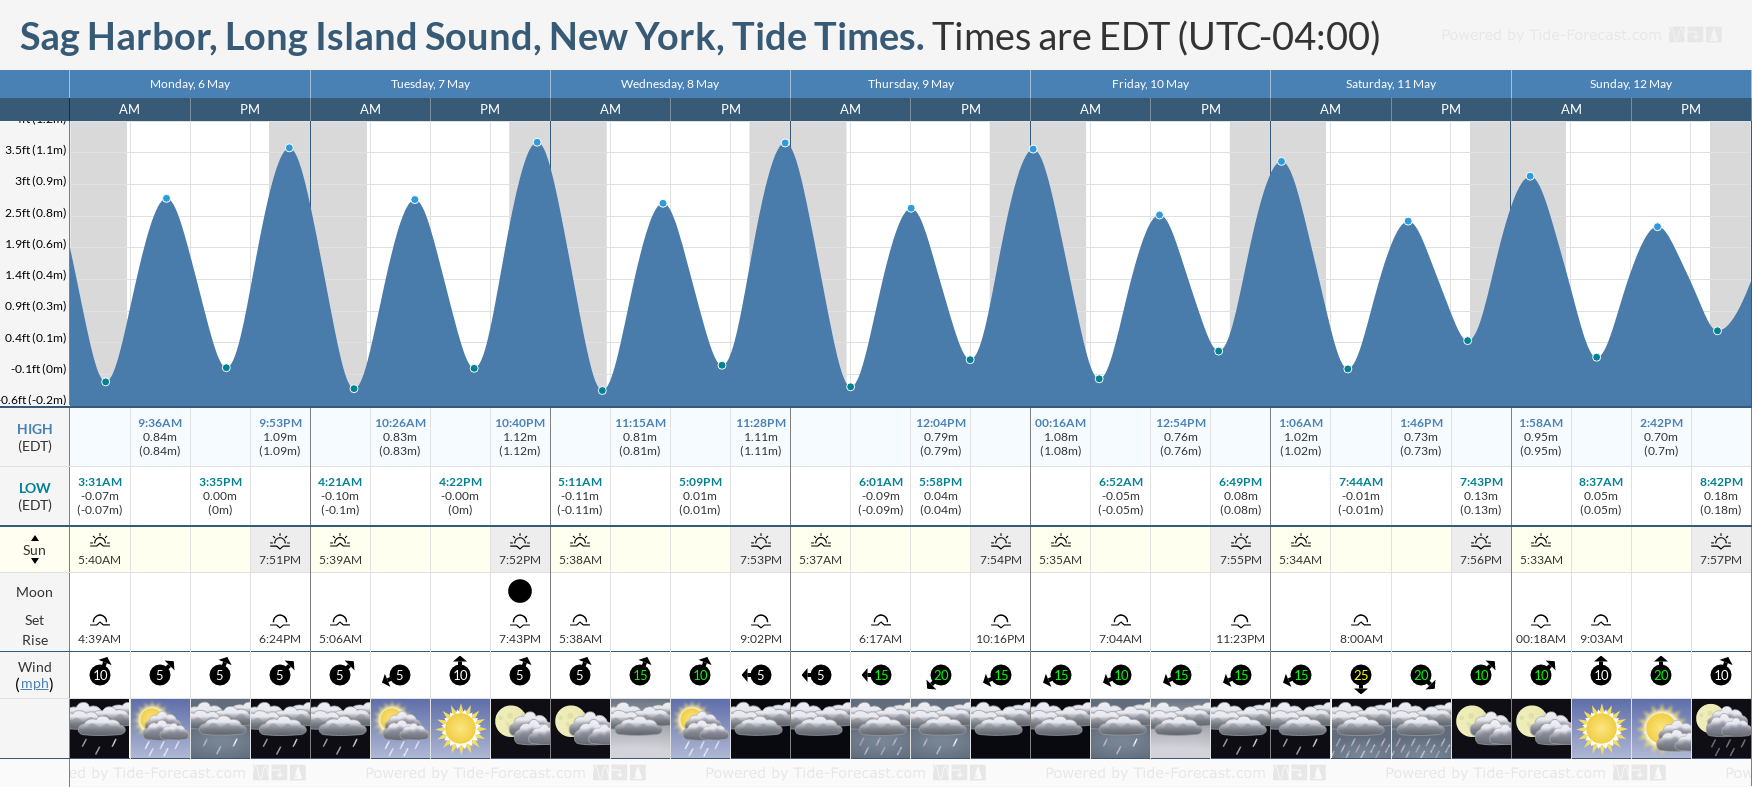 Sag Harbor, Long Island Sound, New York Tide Chart including high and low tide tide times for the next 7 days